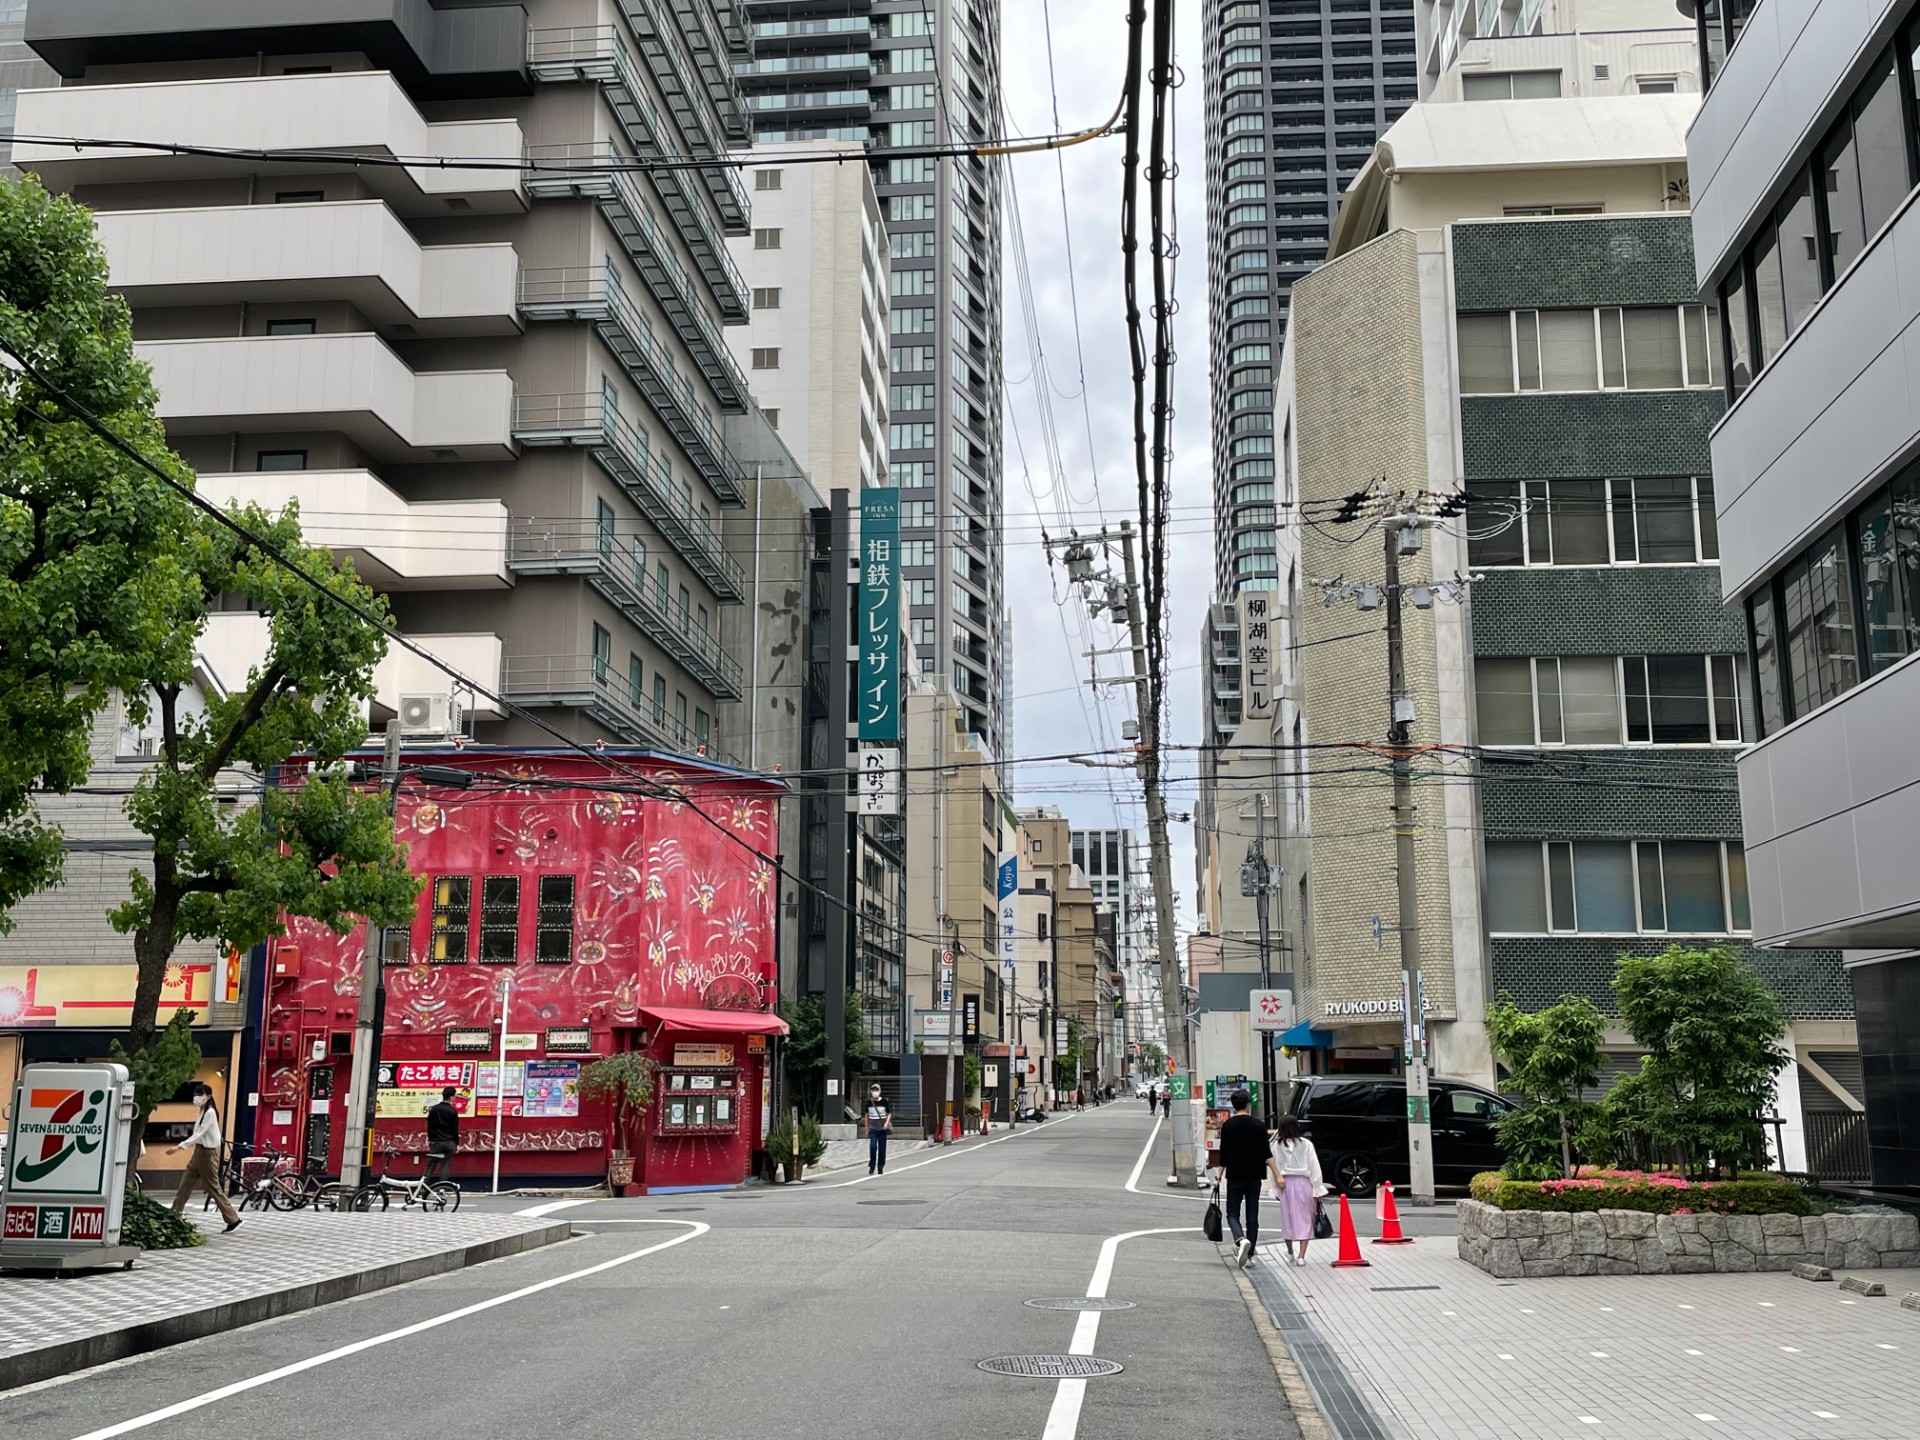 Go further and when you see a red building on your left, at the back of that building is Fresa Inn Osaka-Yodoyabashi.